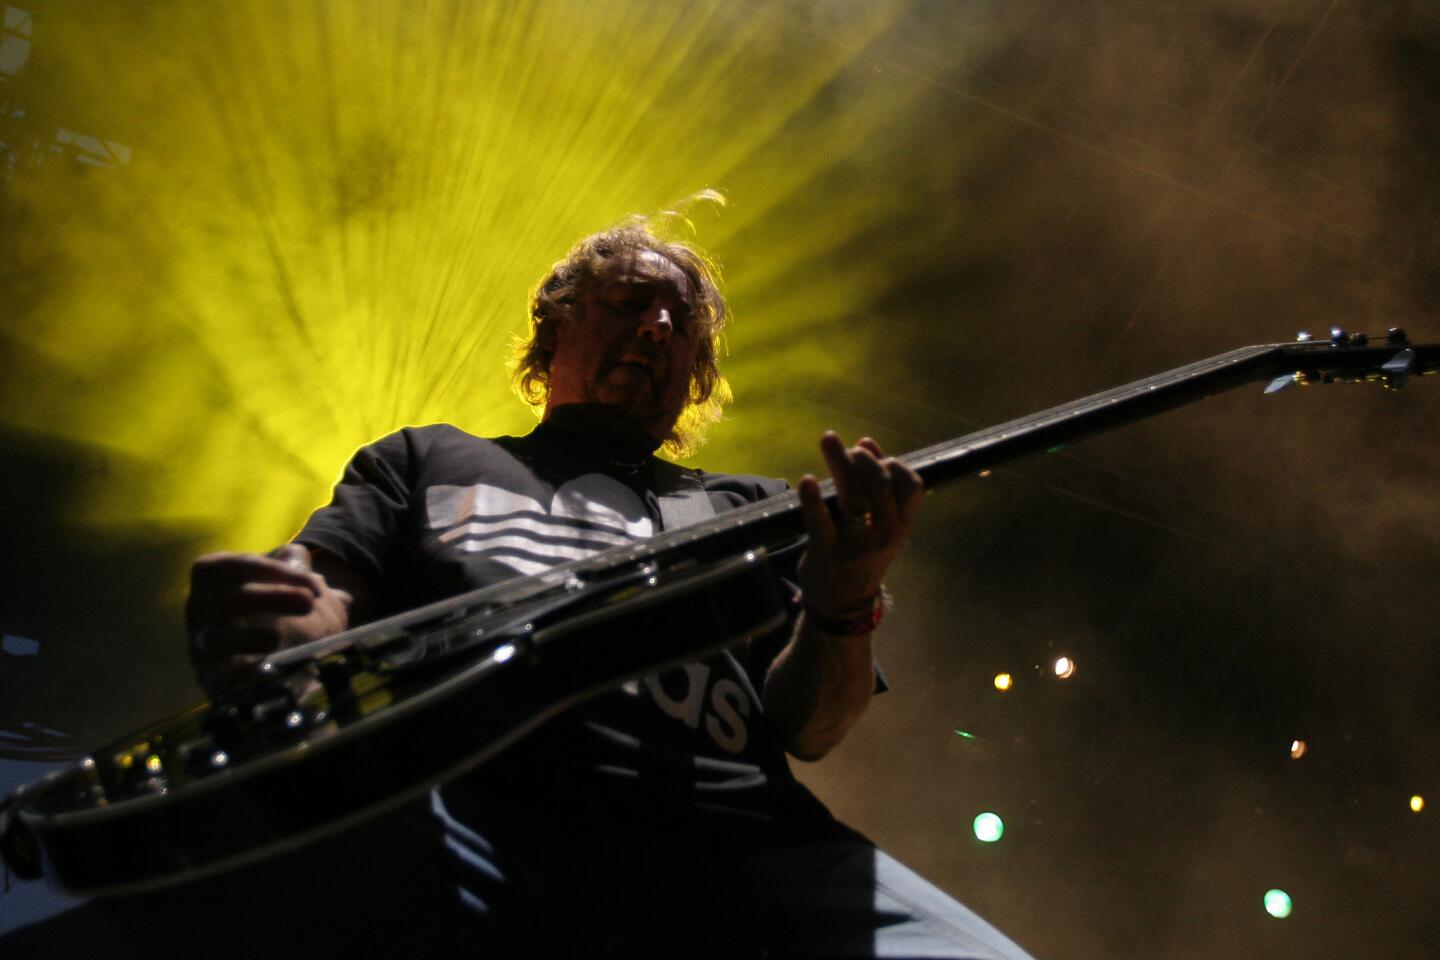 Bassist Peter Hook of New Order performs during the Coachella Valley Music and Arts Festival in 2005 at the Empire Polo Fields in Indio, Calif.